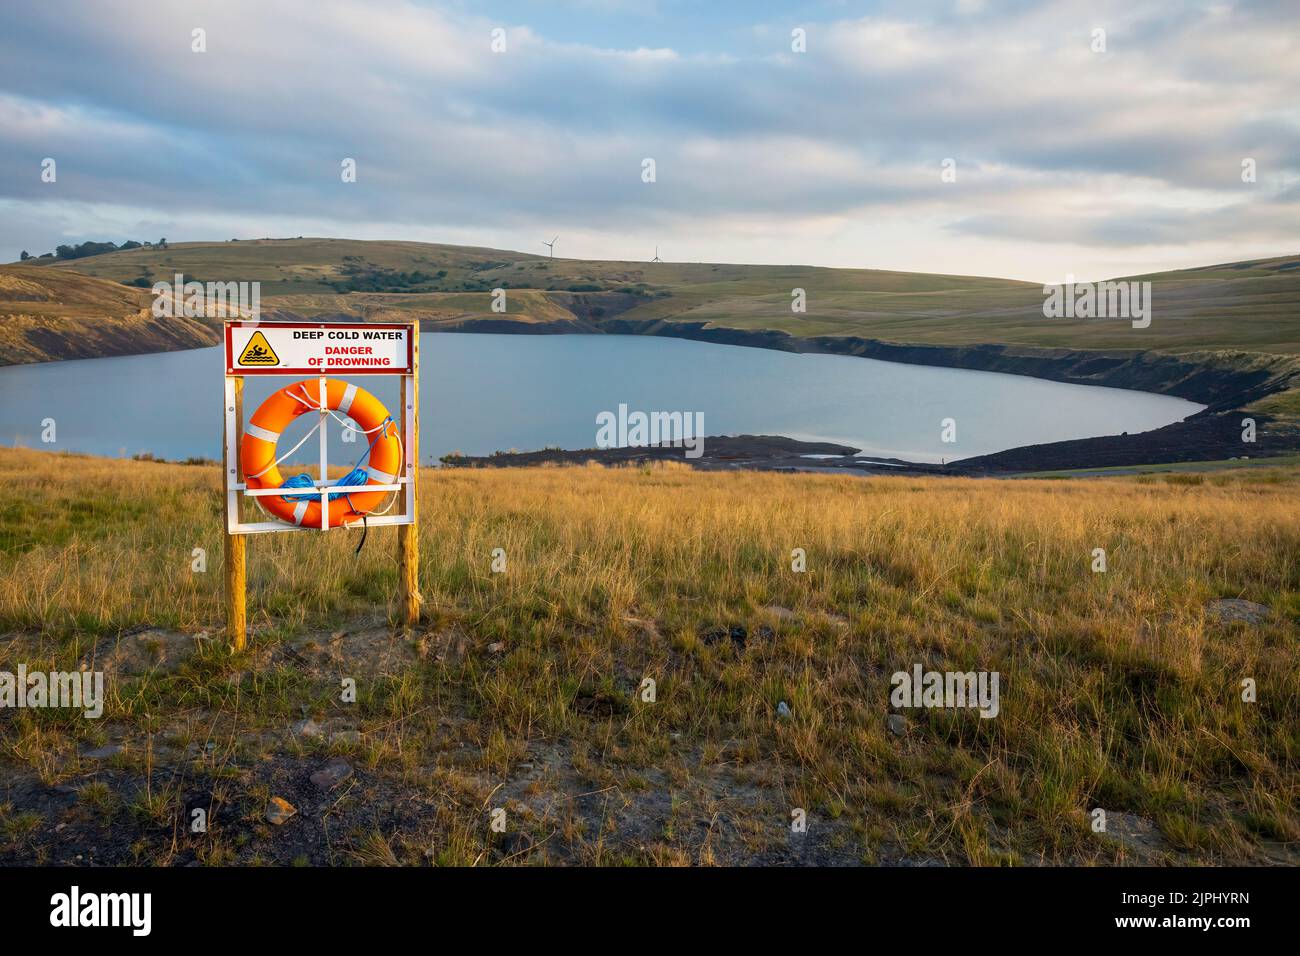 A lifesaver on a lake with a danger of drowning sign in South Wales UK Stock Photo